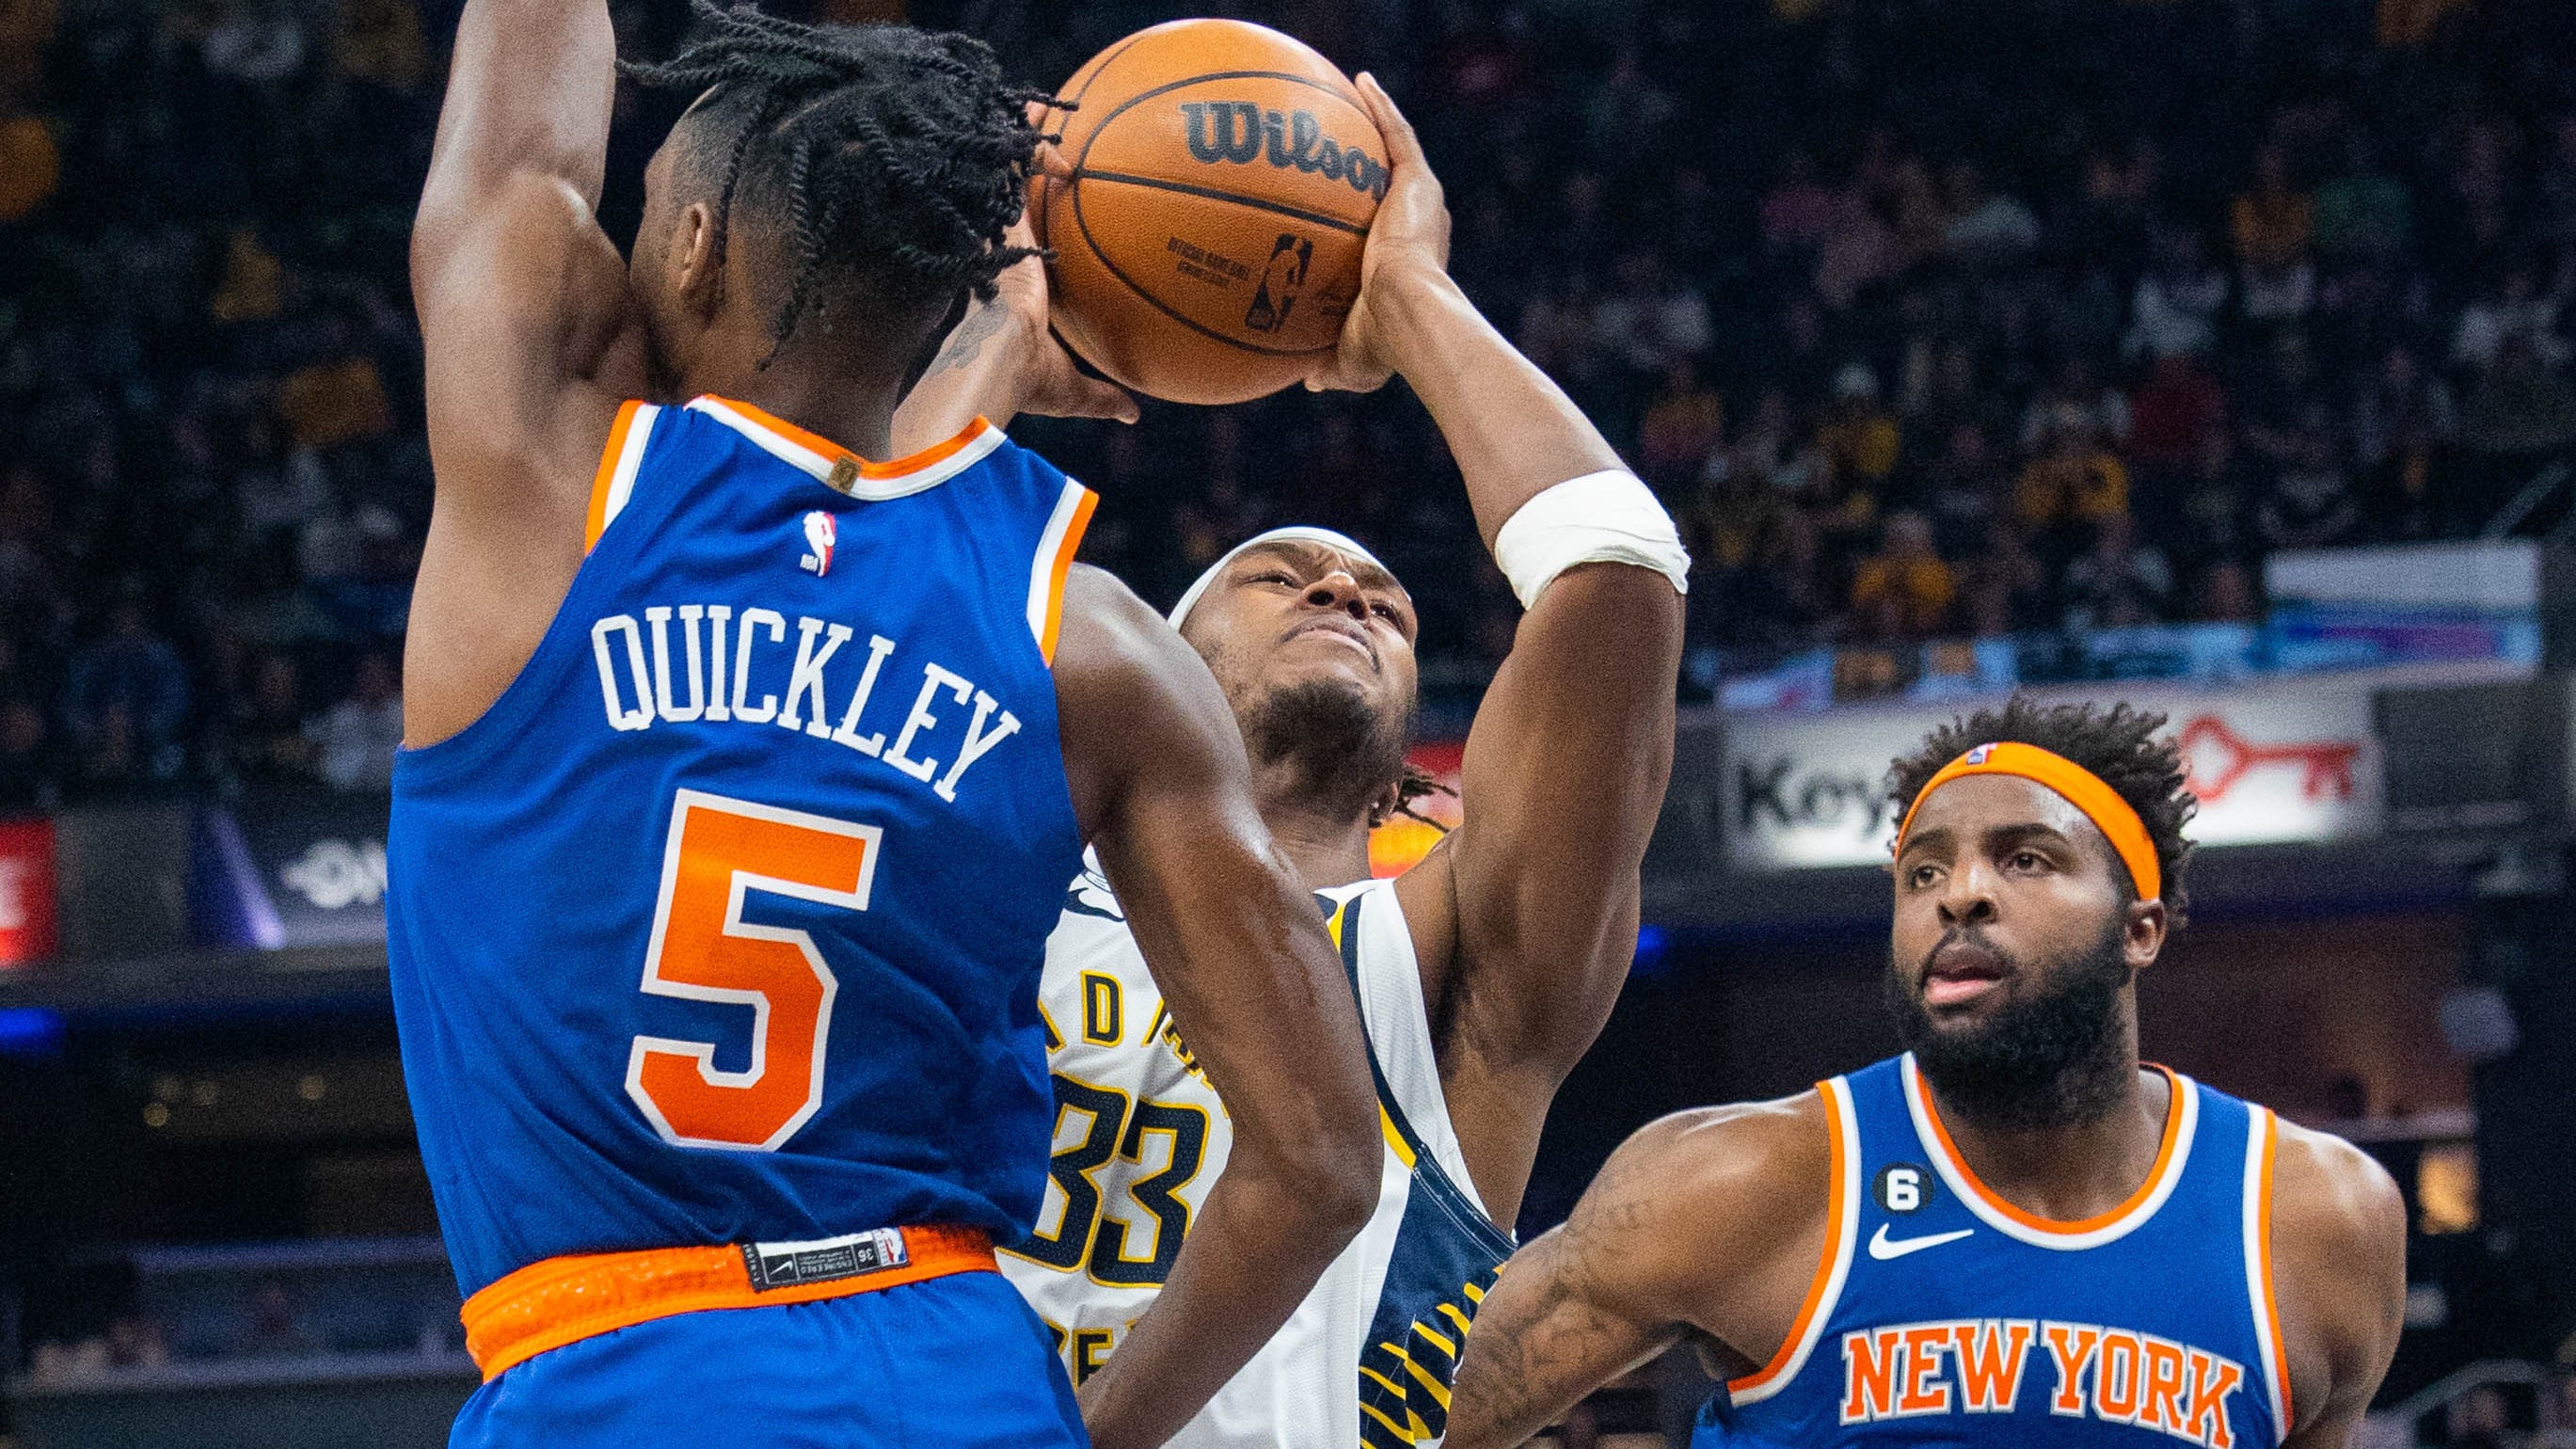 Indiana Pacers at New York Knicks odds, picks and predictions